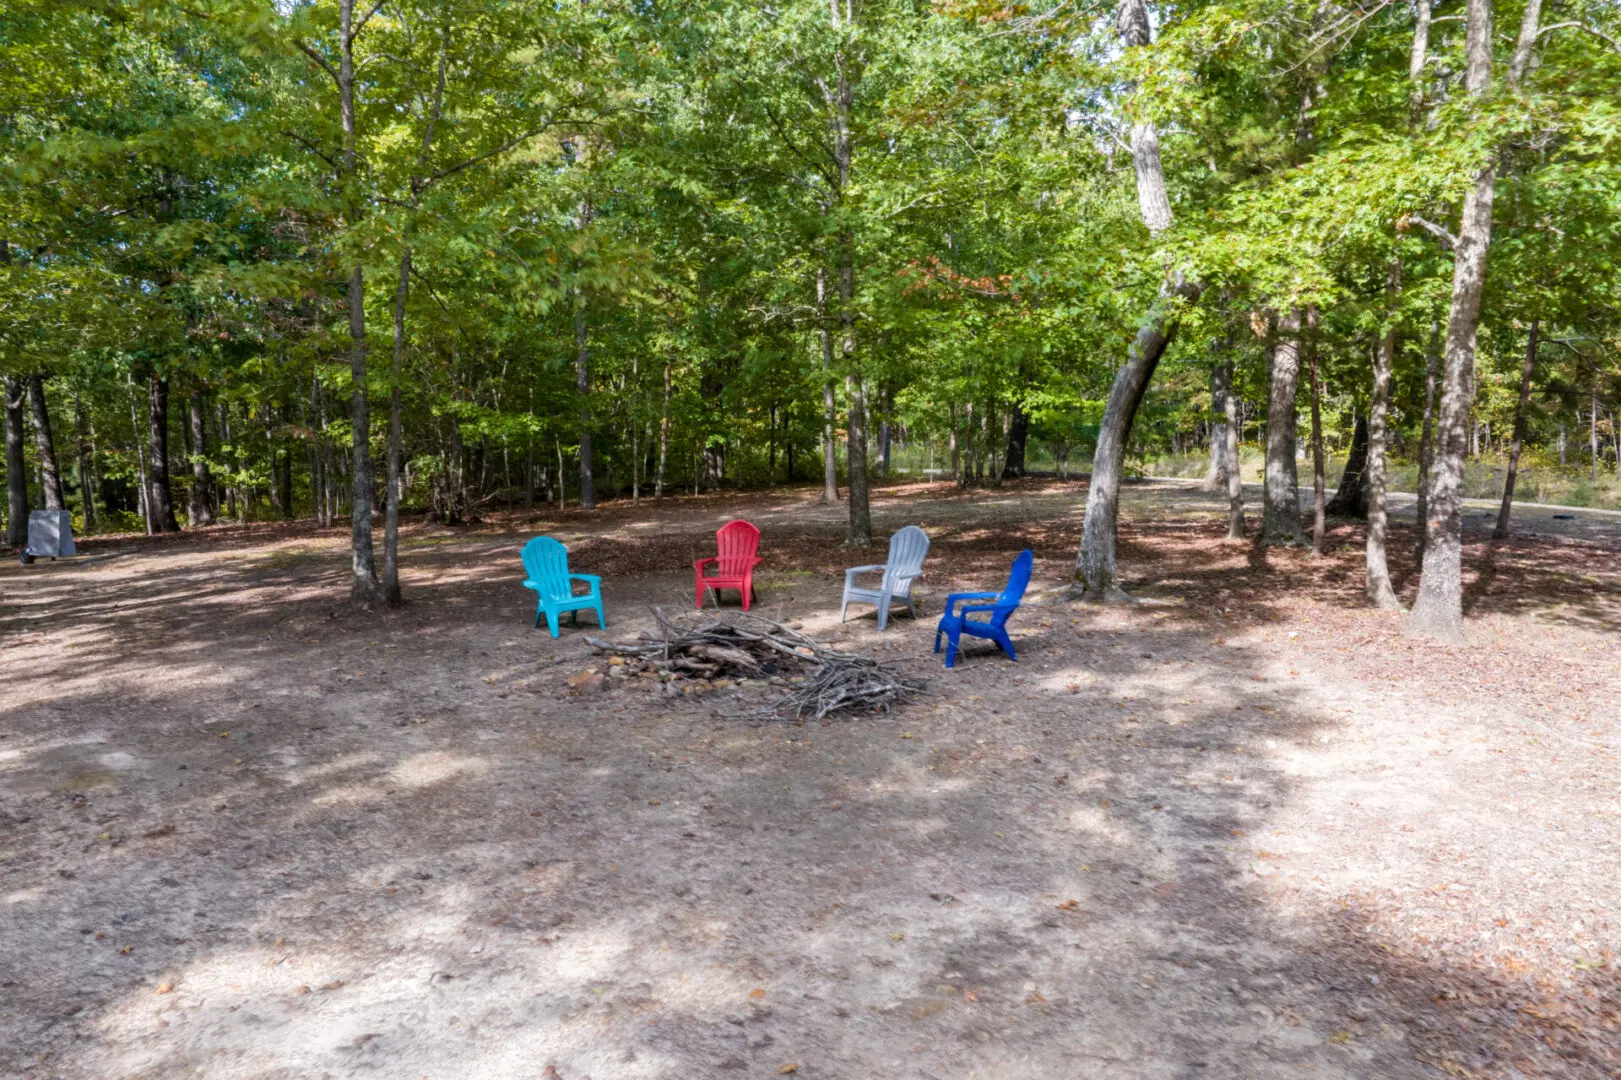 A fire pit in the middle of a wooded area.